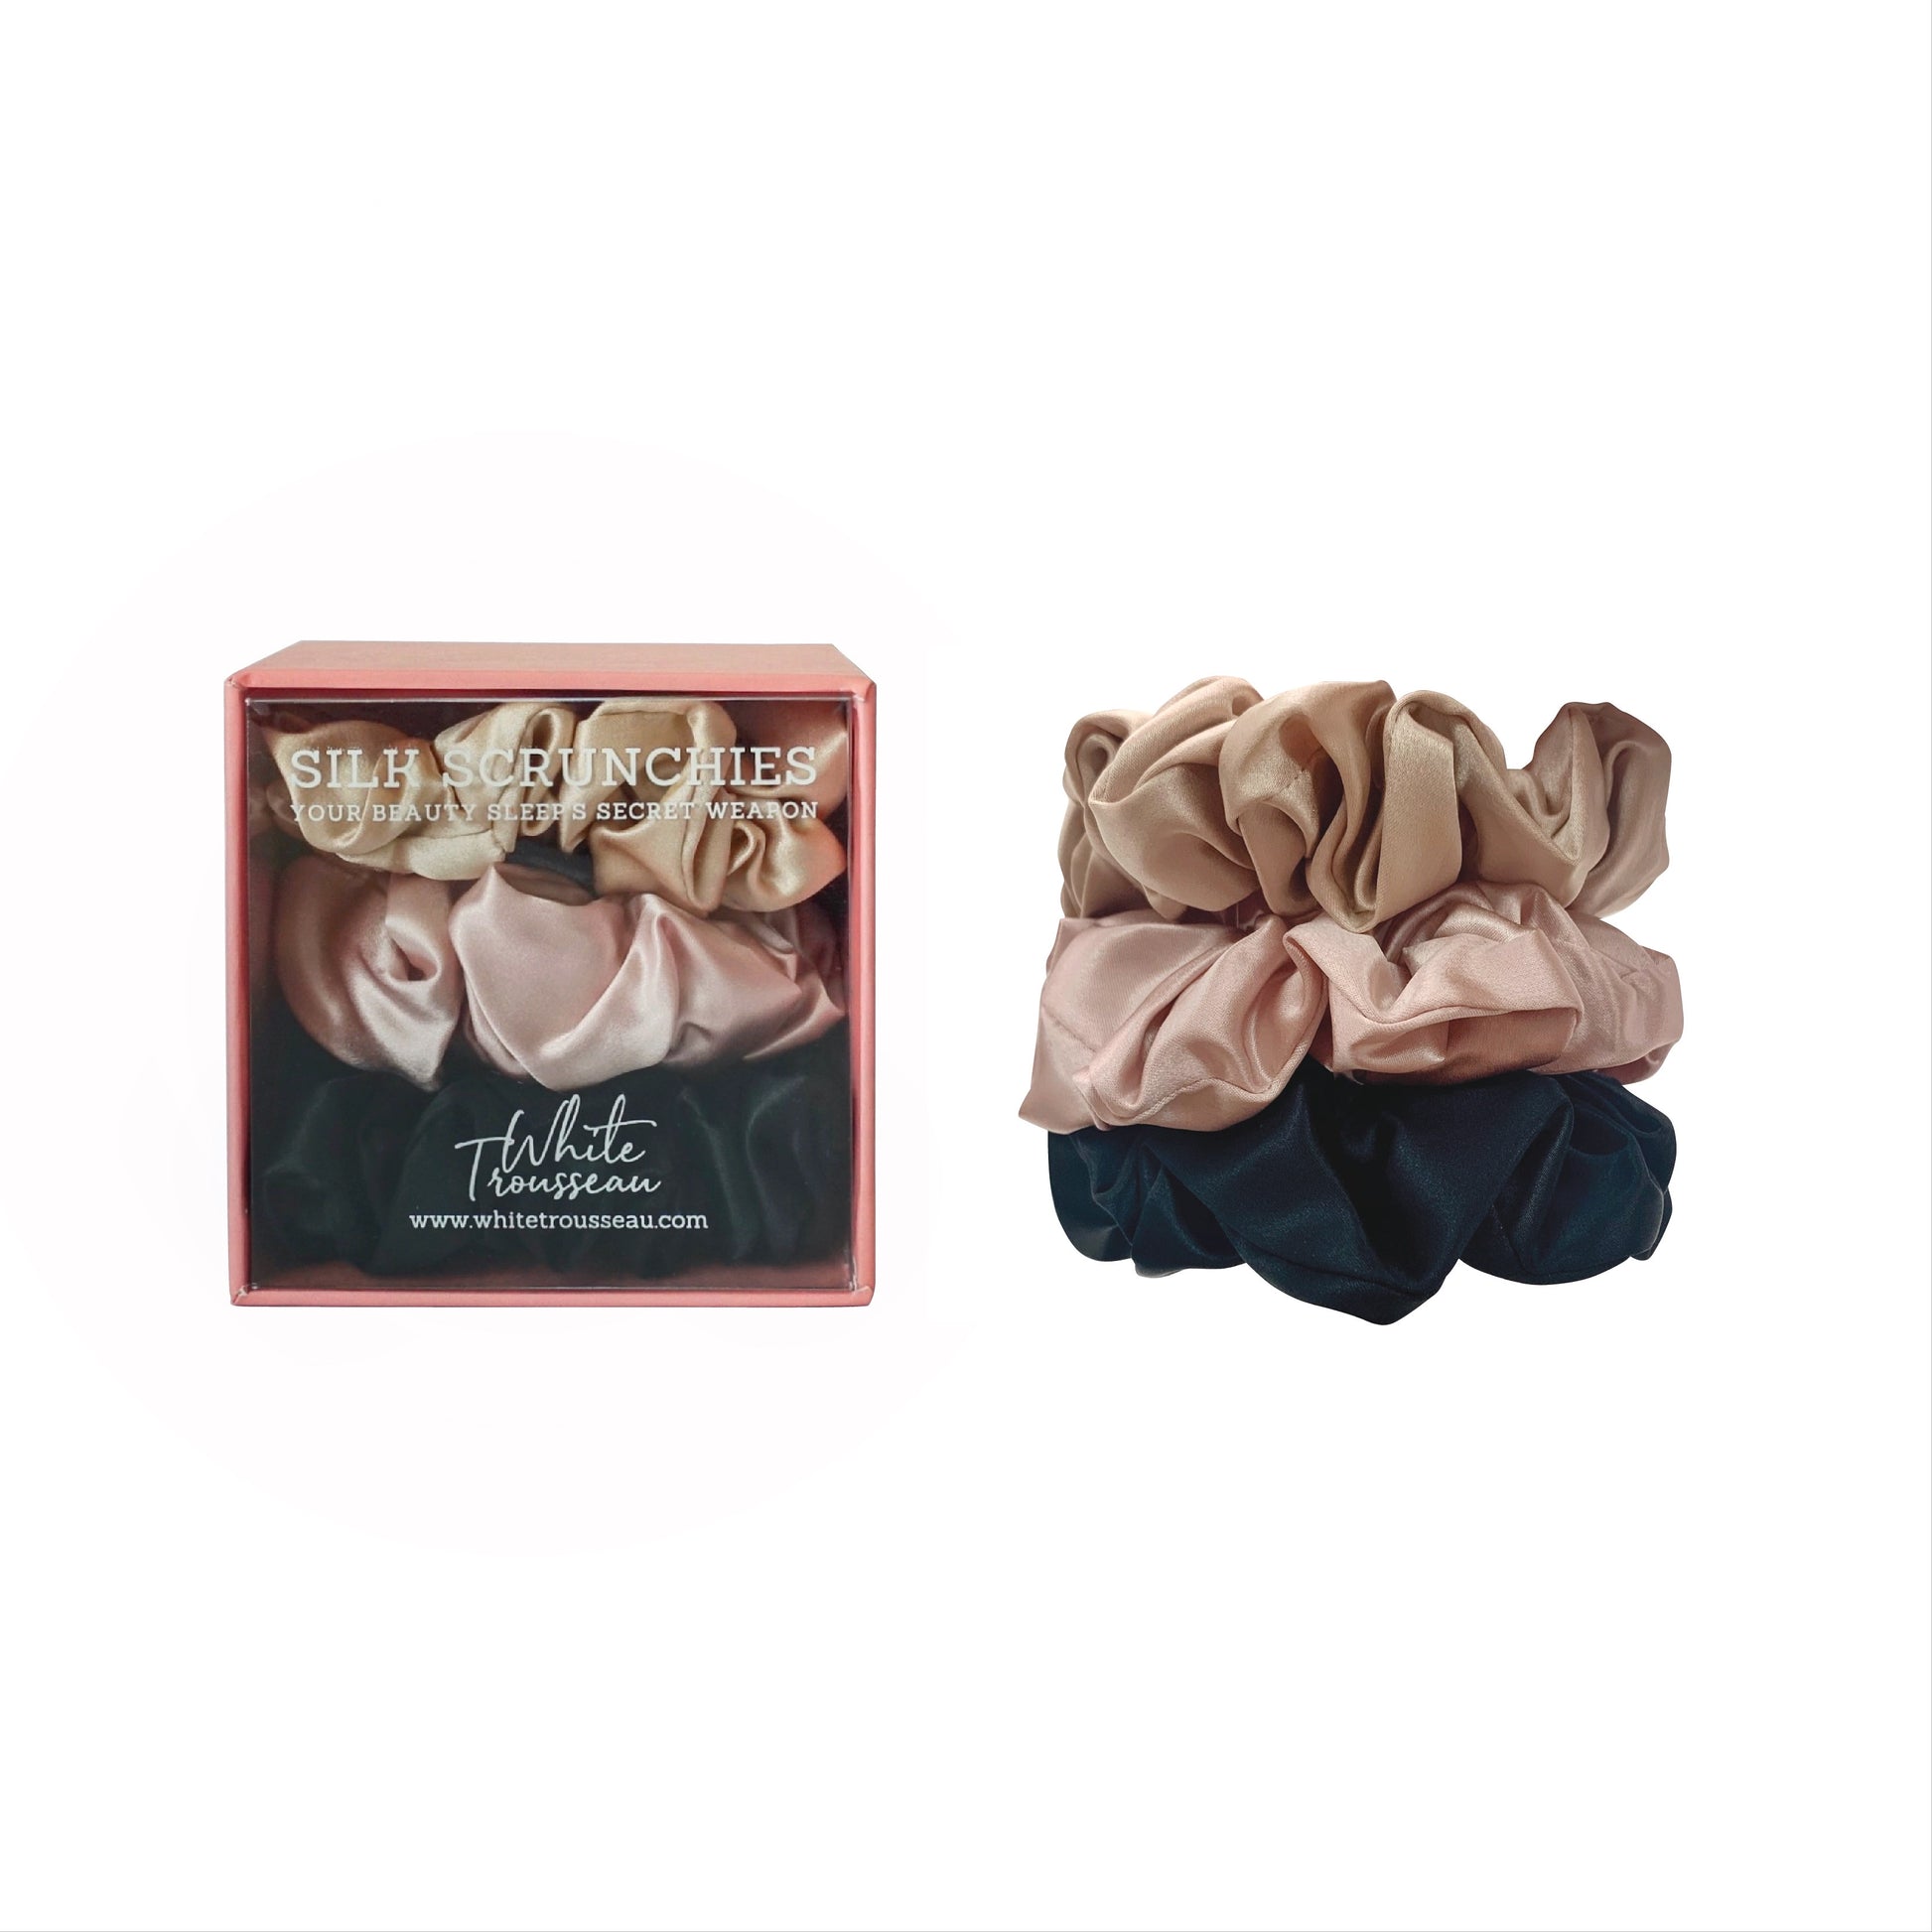 White Trousseau’s Pure Mulberry Silk Hair Scrunchies, packaged in a lovely pink box. Wanting to stop hair loss or breakage? Our silk hair scrunchies are designed to prevent hair creasing and tangling, as well as reduce frizz and breakages. Get smoother and healthier hair in no time!